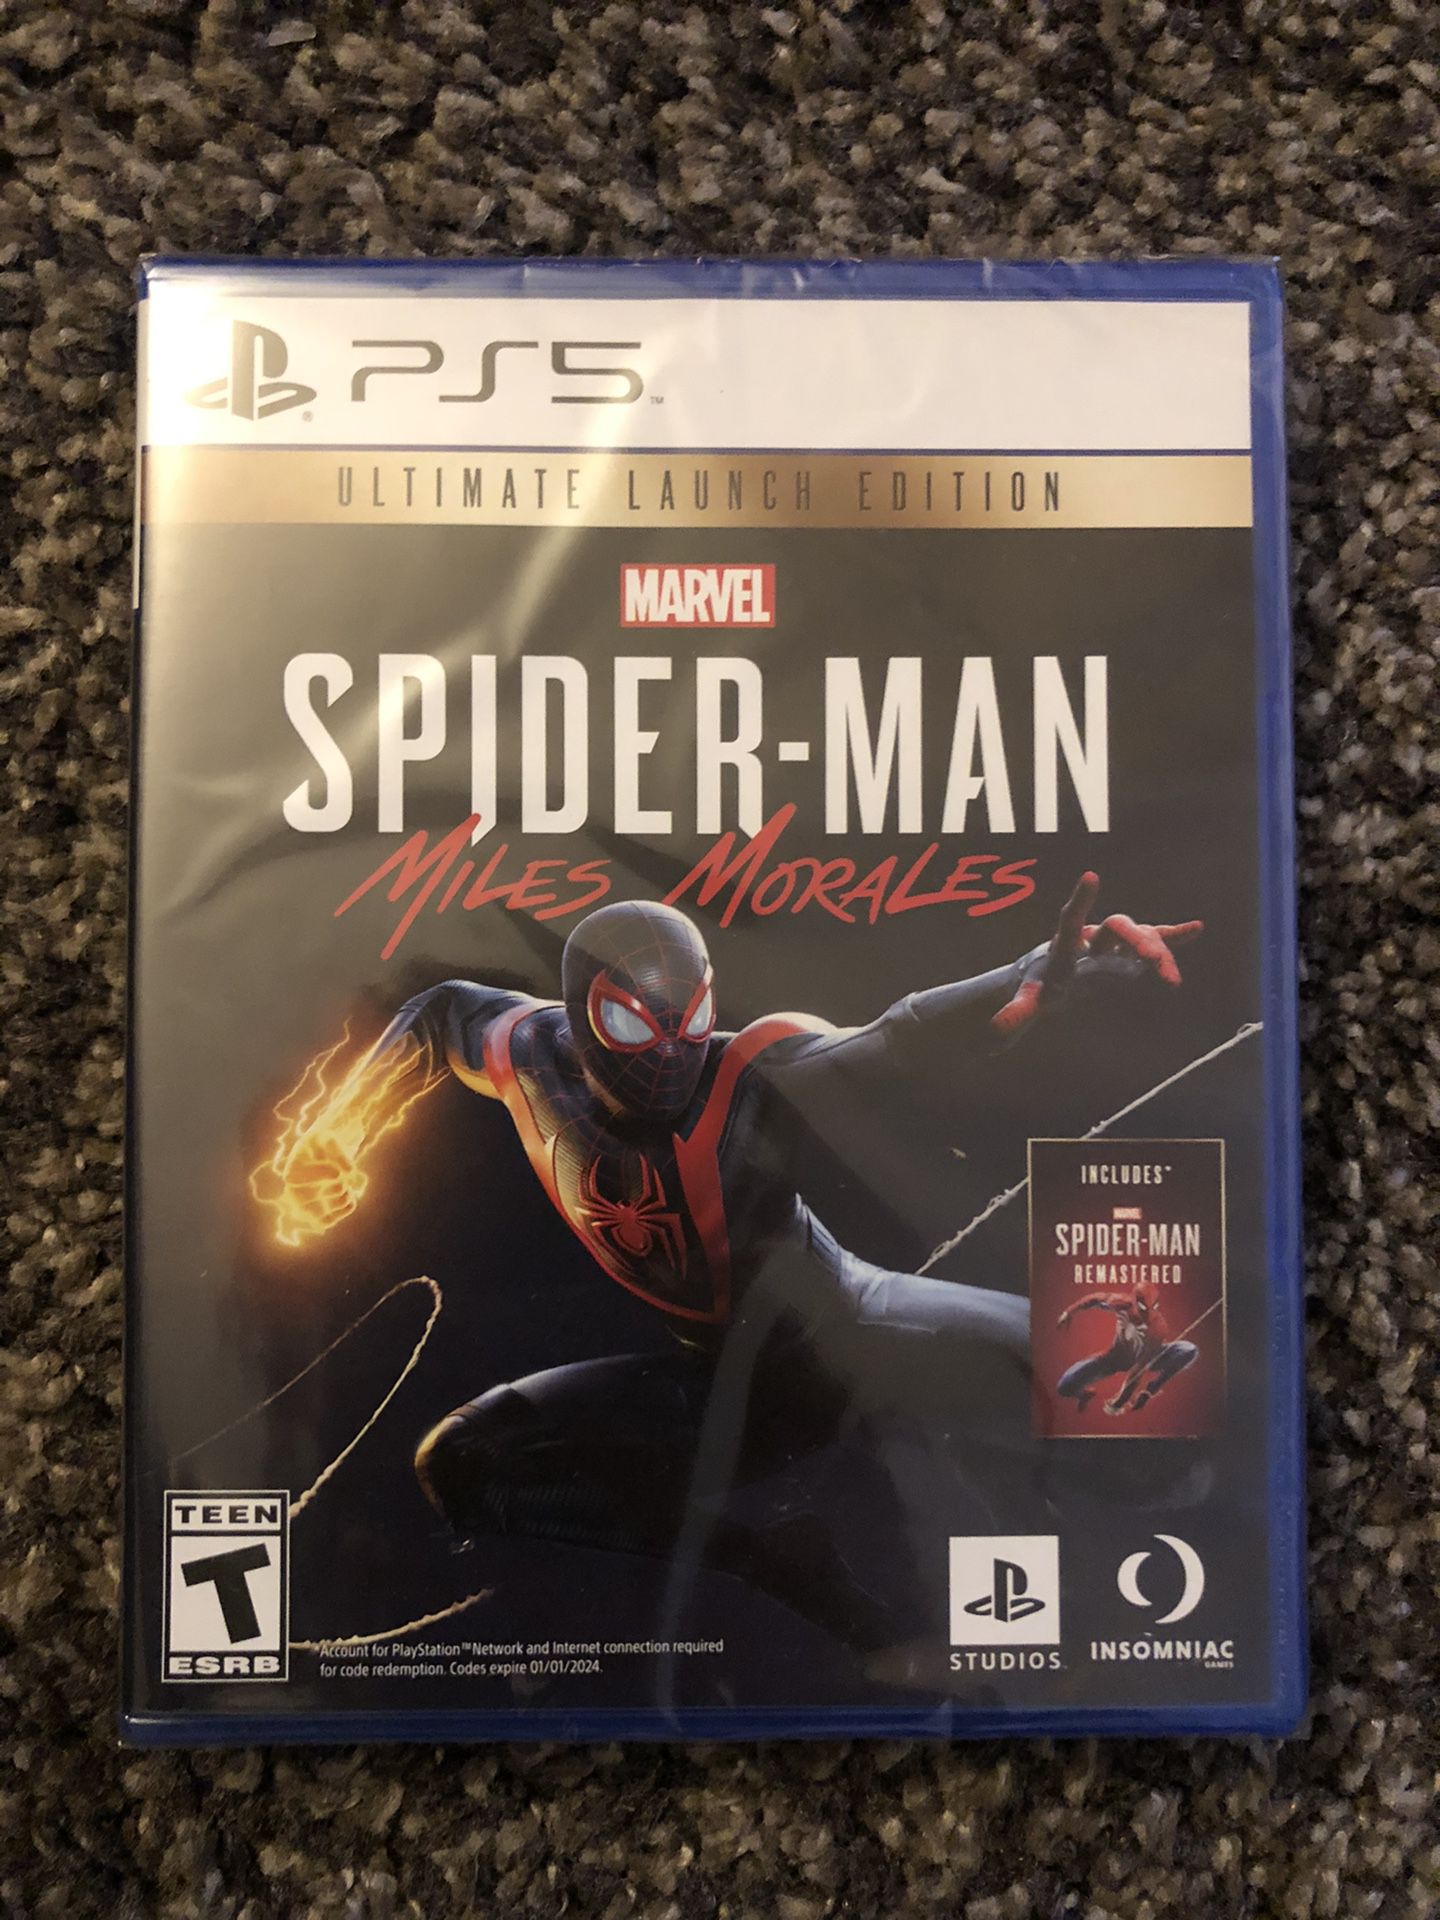 PS5 Spider-Man Ultimate Launch Edition (Brand New) Video Game PlayStation 5